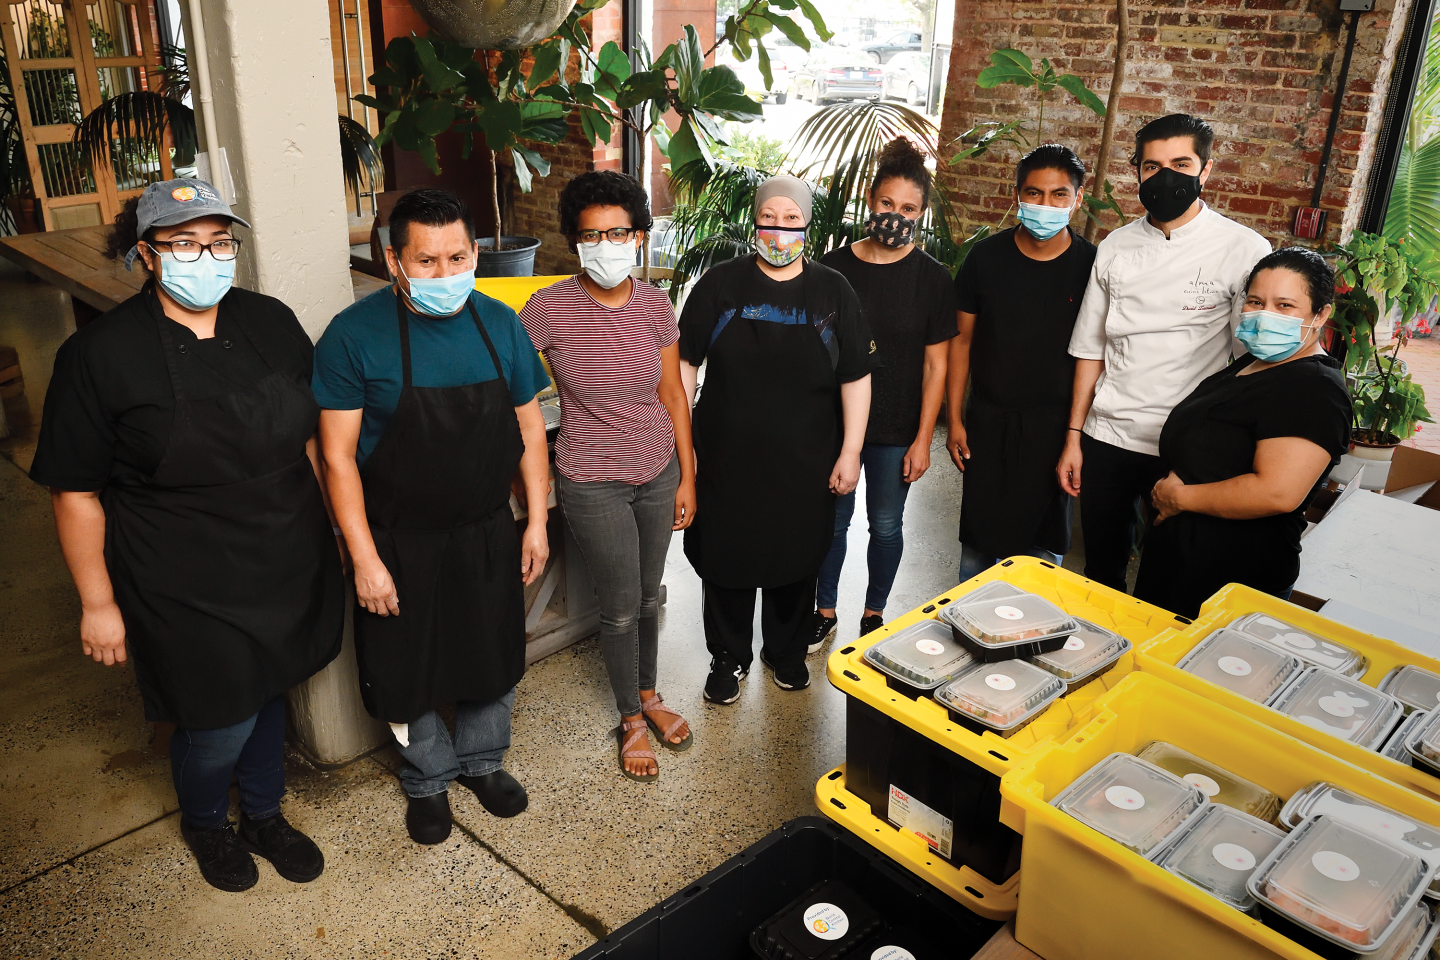 A group of masked people in a kitchen